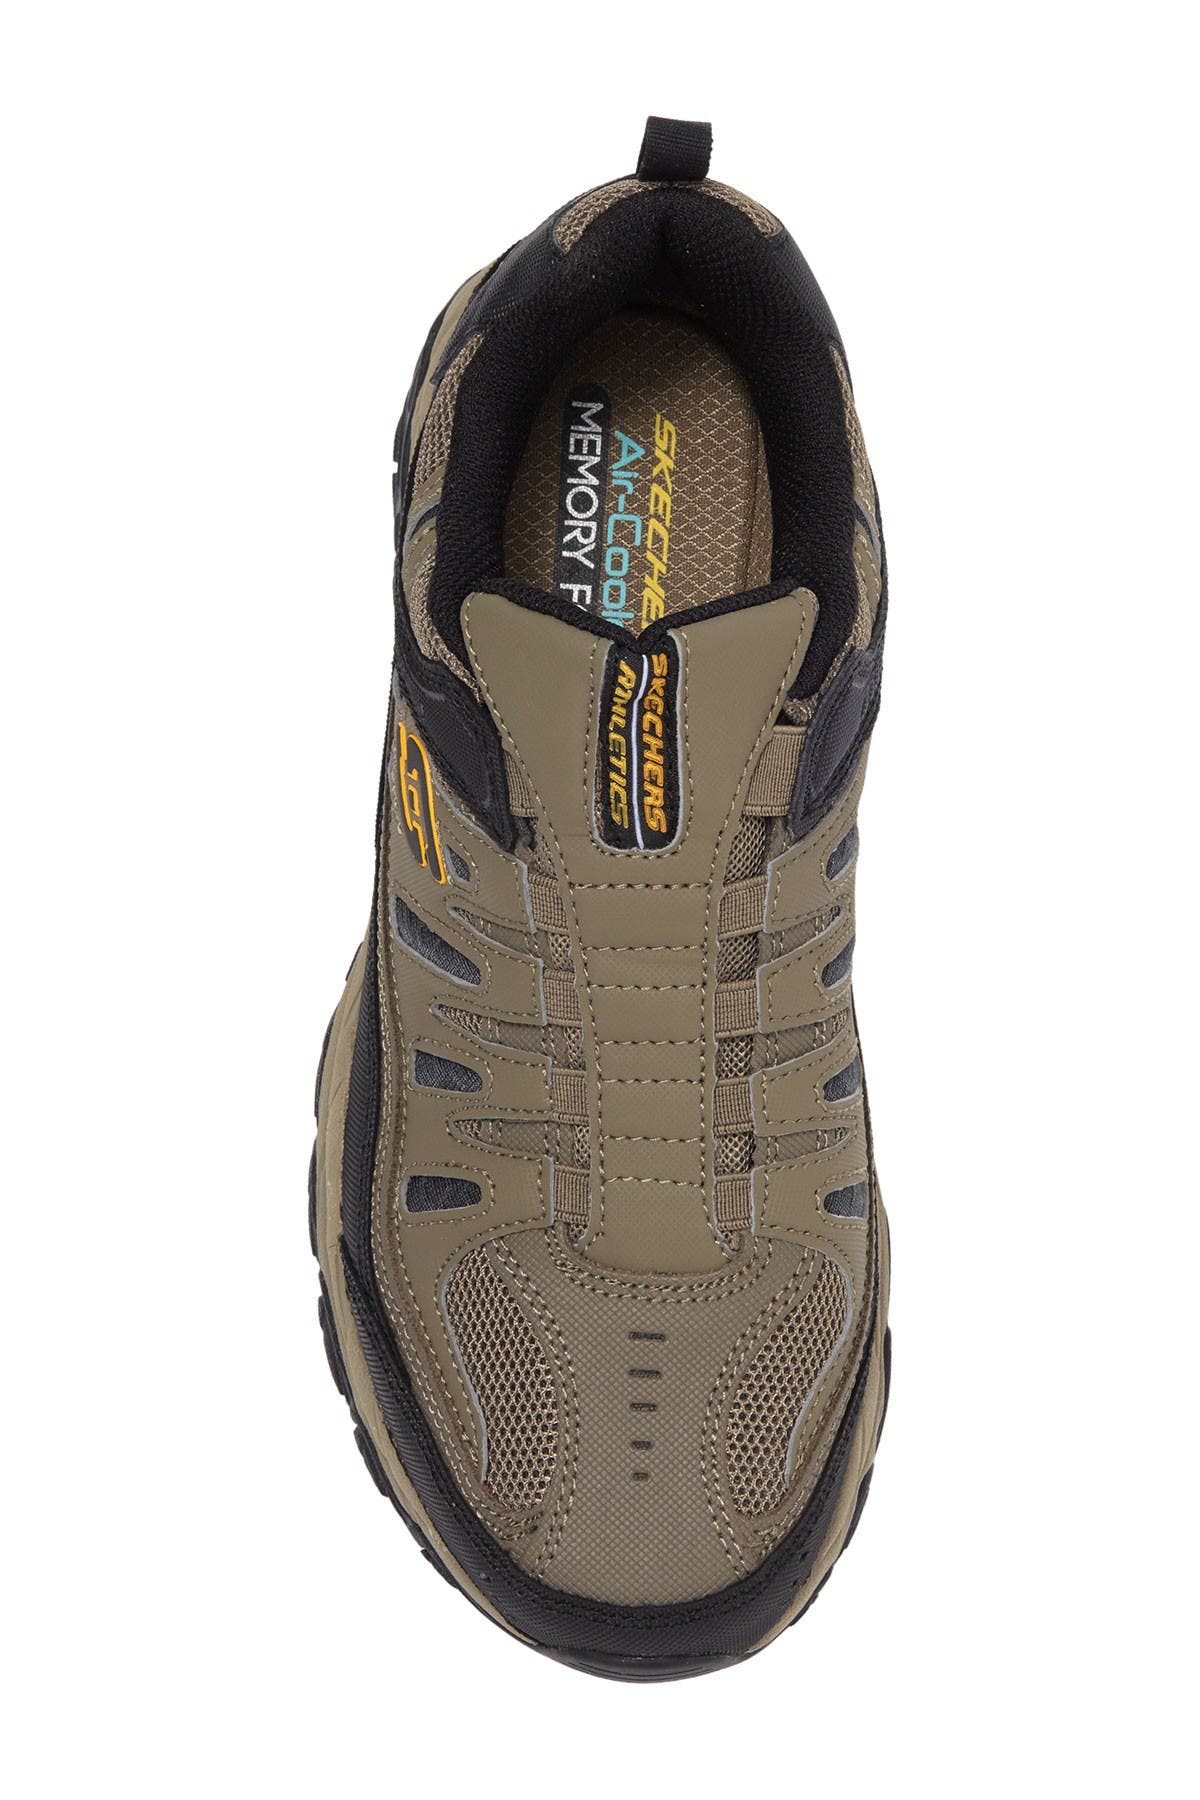 Skechers After Burn M. Fit Athletic Shoe In Pbl-pebble